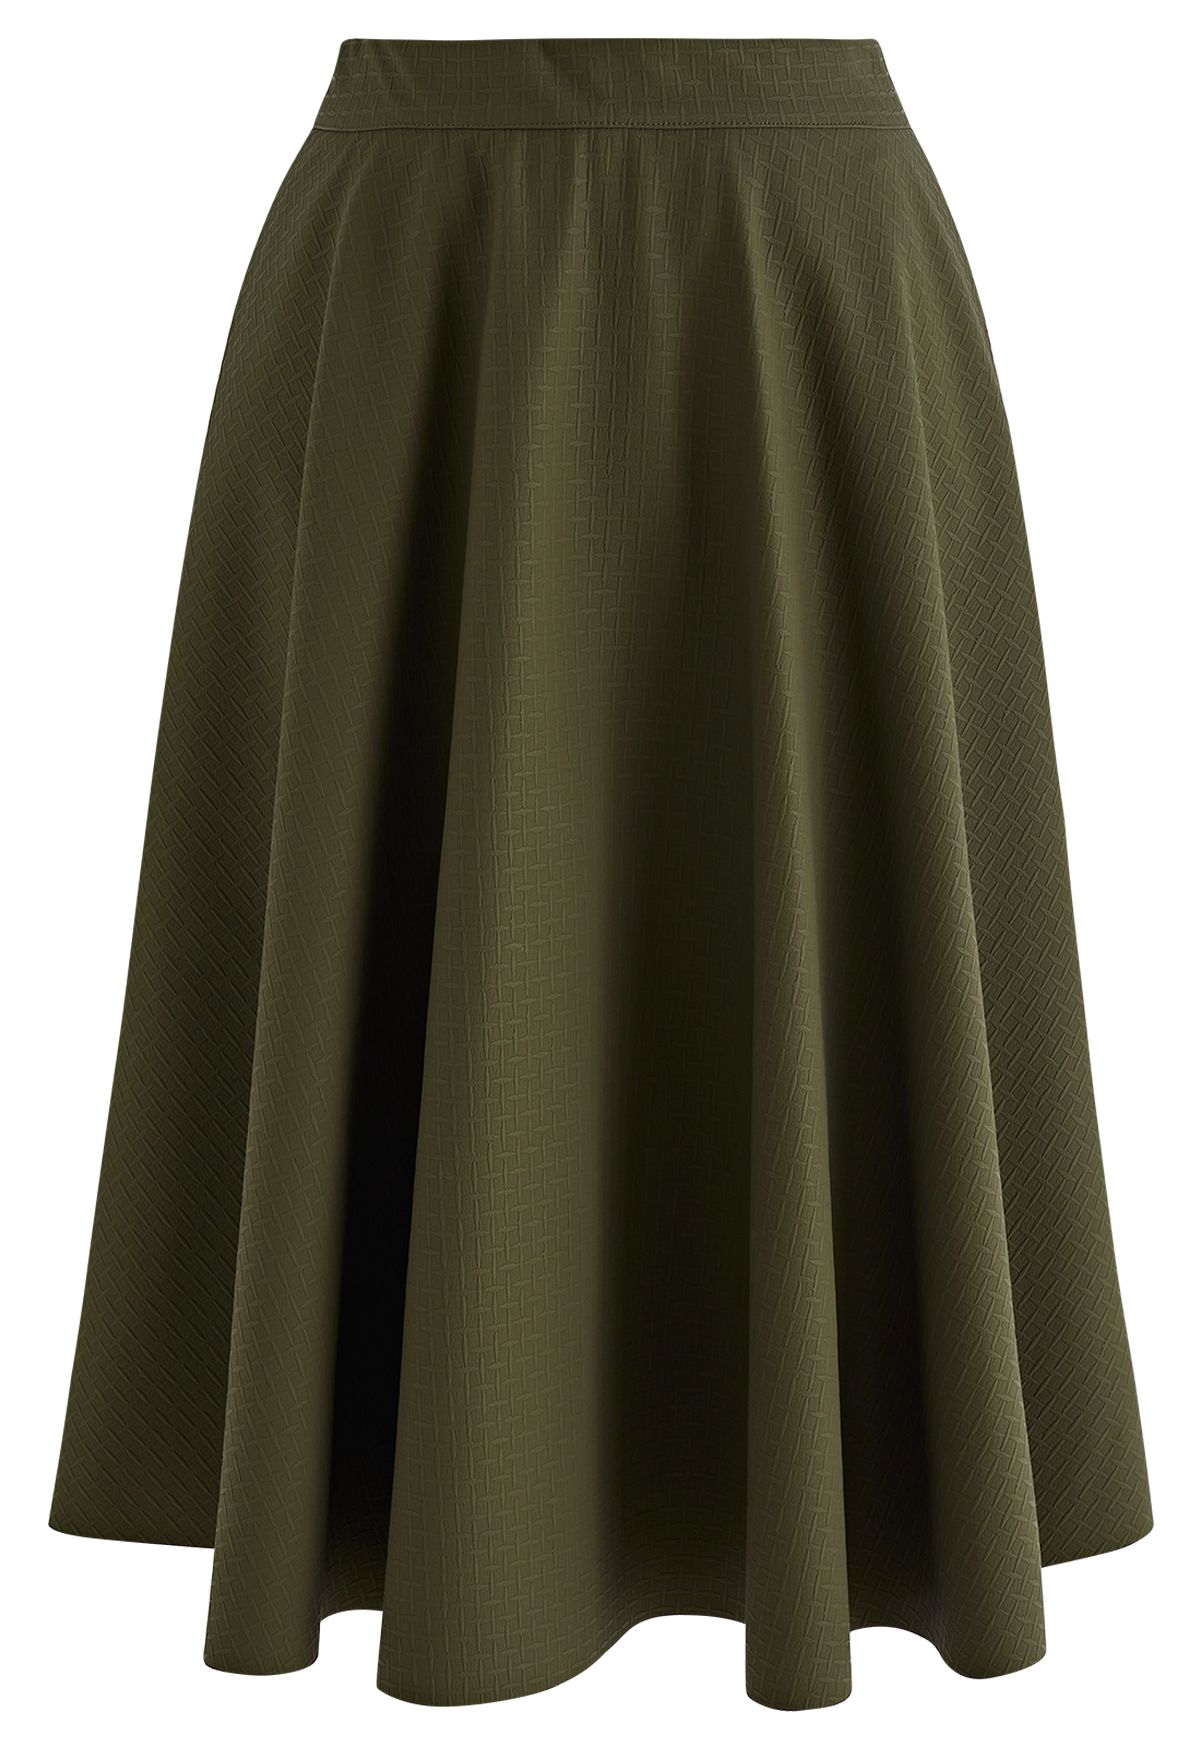 Faux Leather Textured Midi Skirt in Army Green